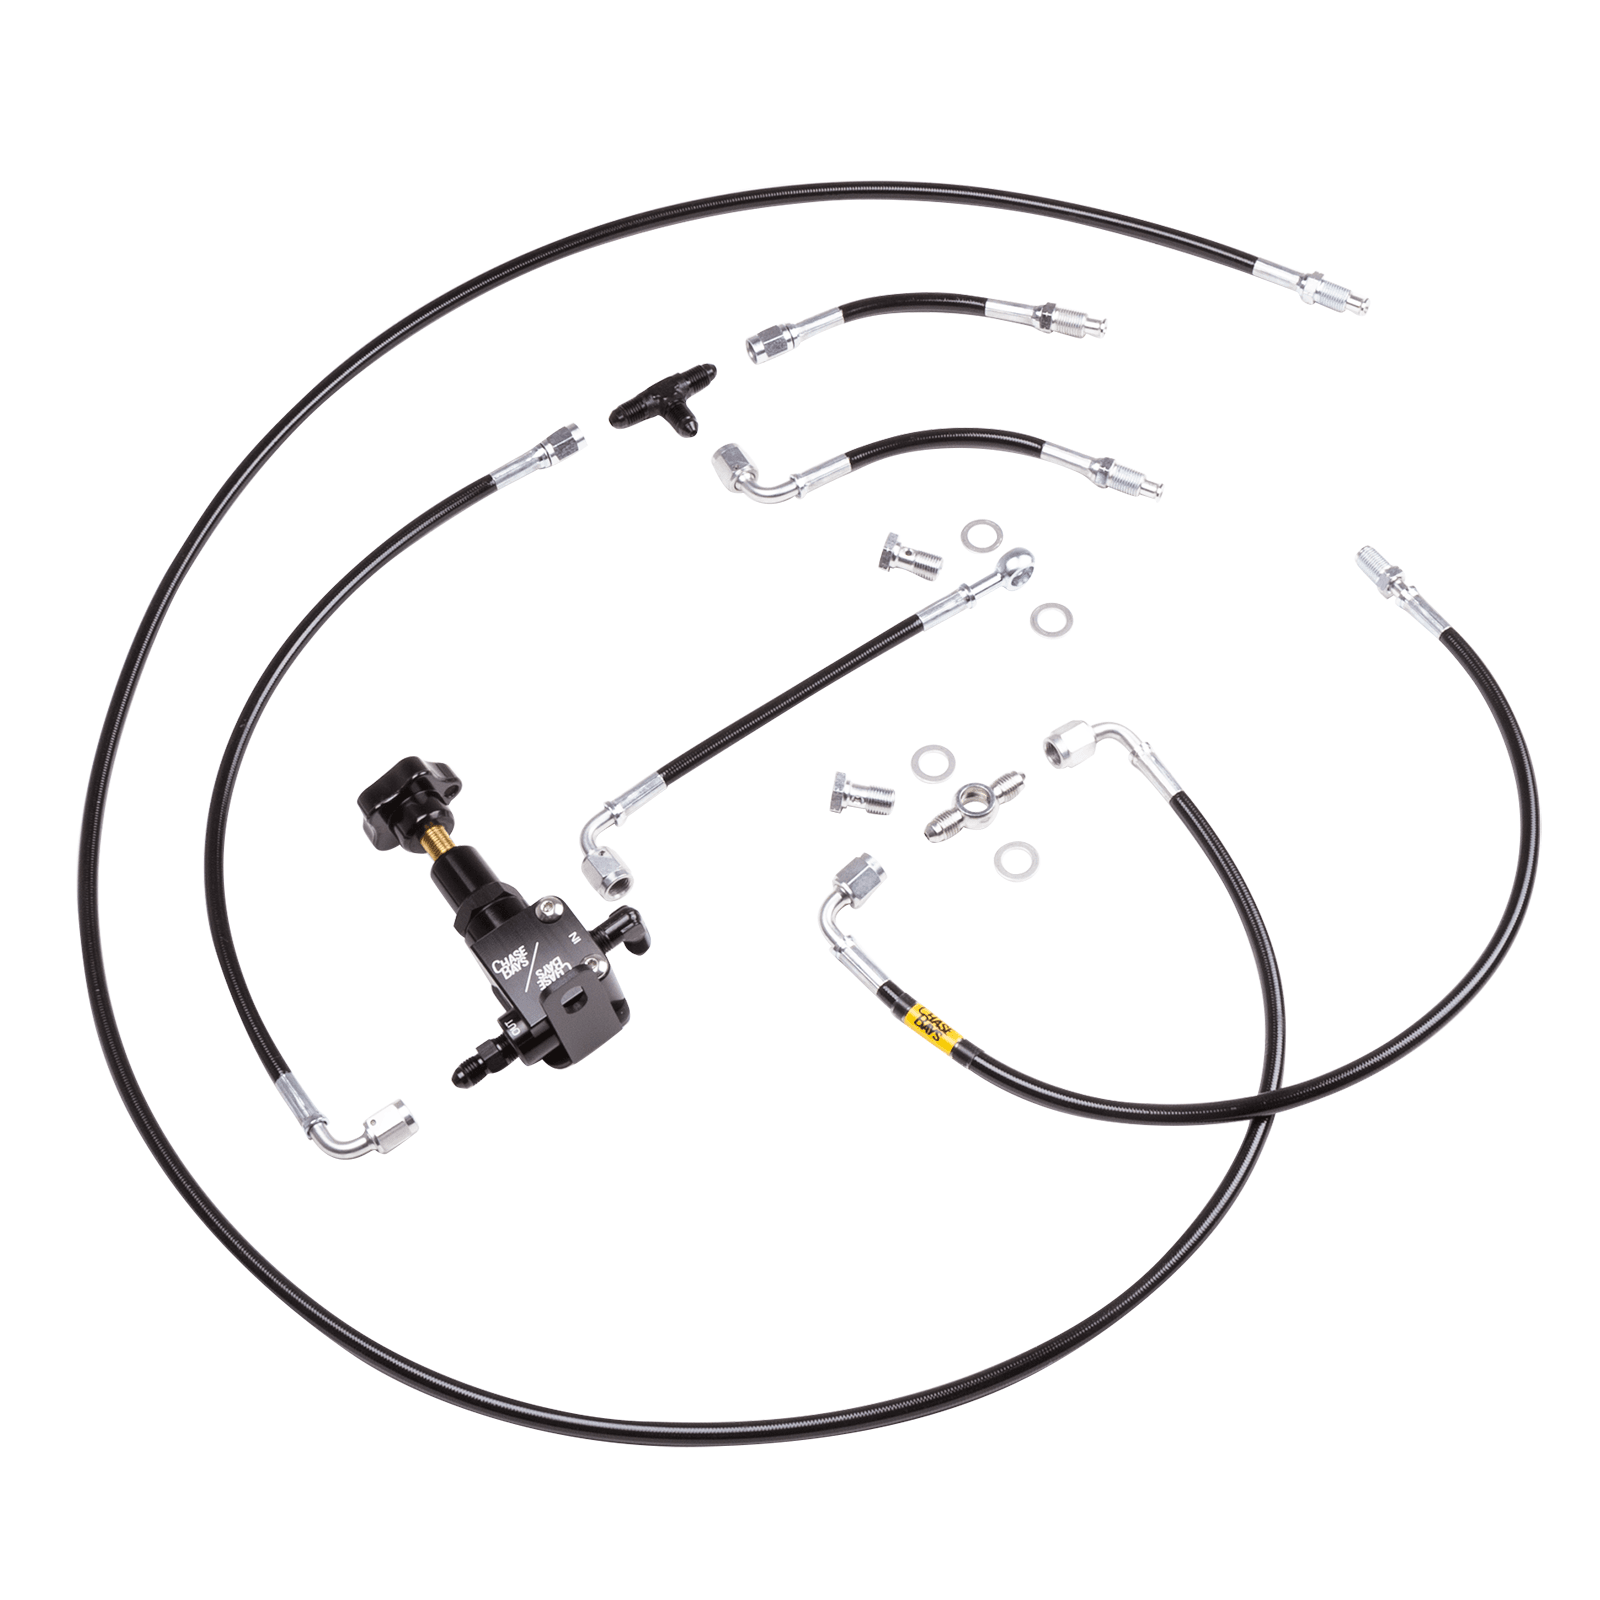 CHASE BAYS Lexus IS300 Brake Line Relocation Kit for OEM Brake Cylinders - PARTS33 GmbH